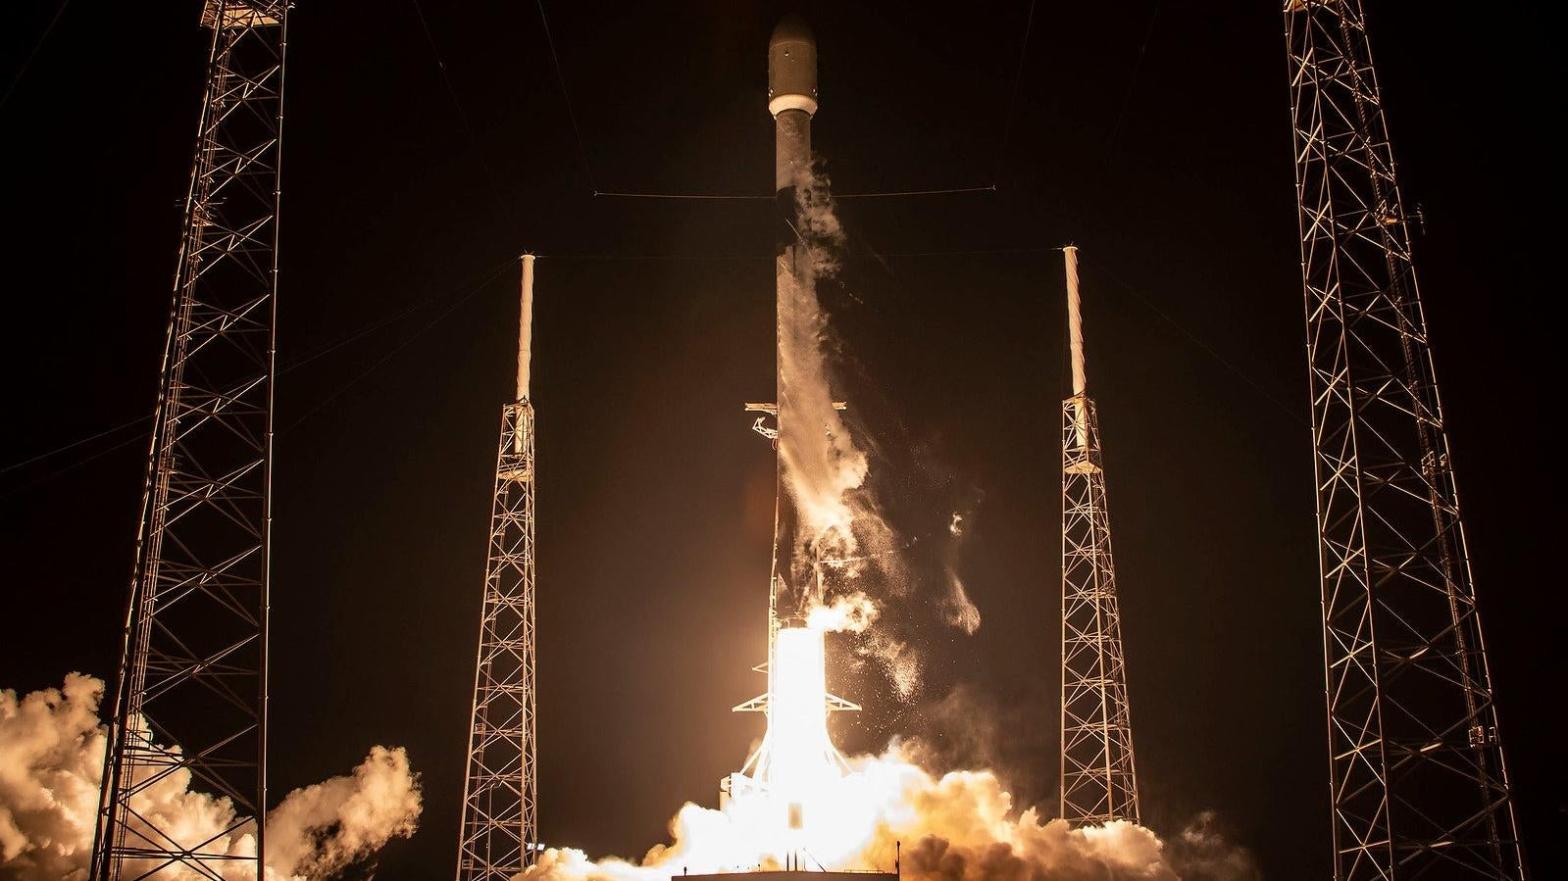 SpaceX's Falcon 9 rocket launching from Cape Canaveral in Florida on April 7, 2023. (Photo: SpaceX)